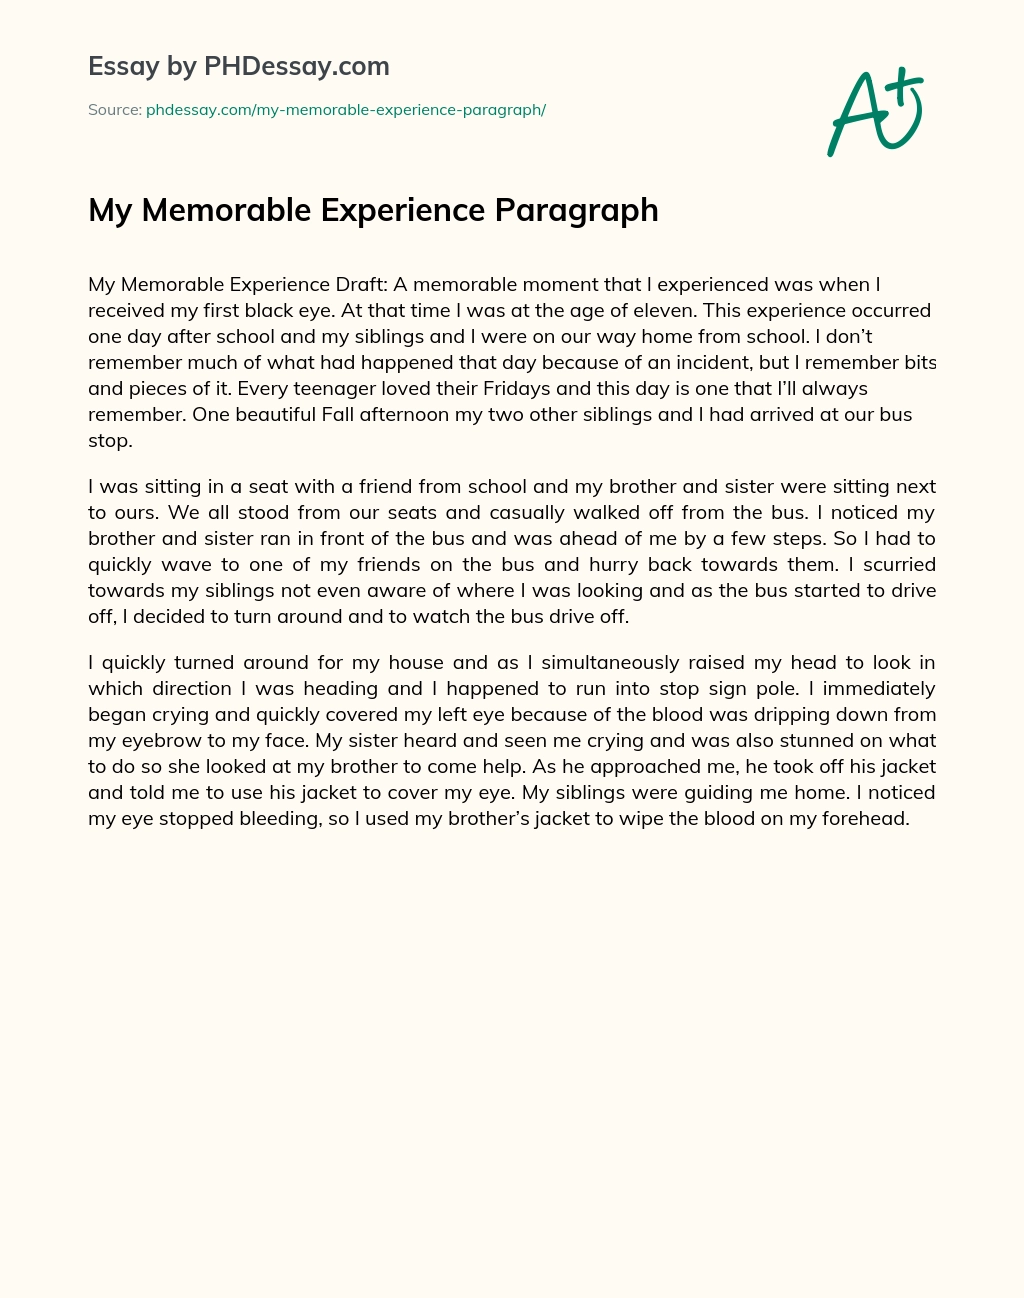 essay for memorable experience